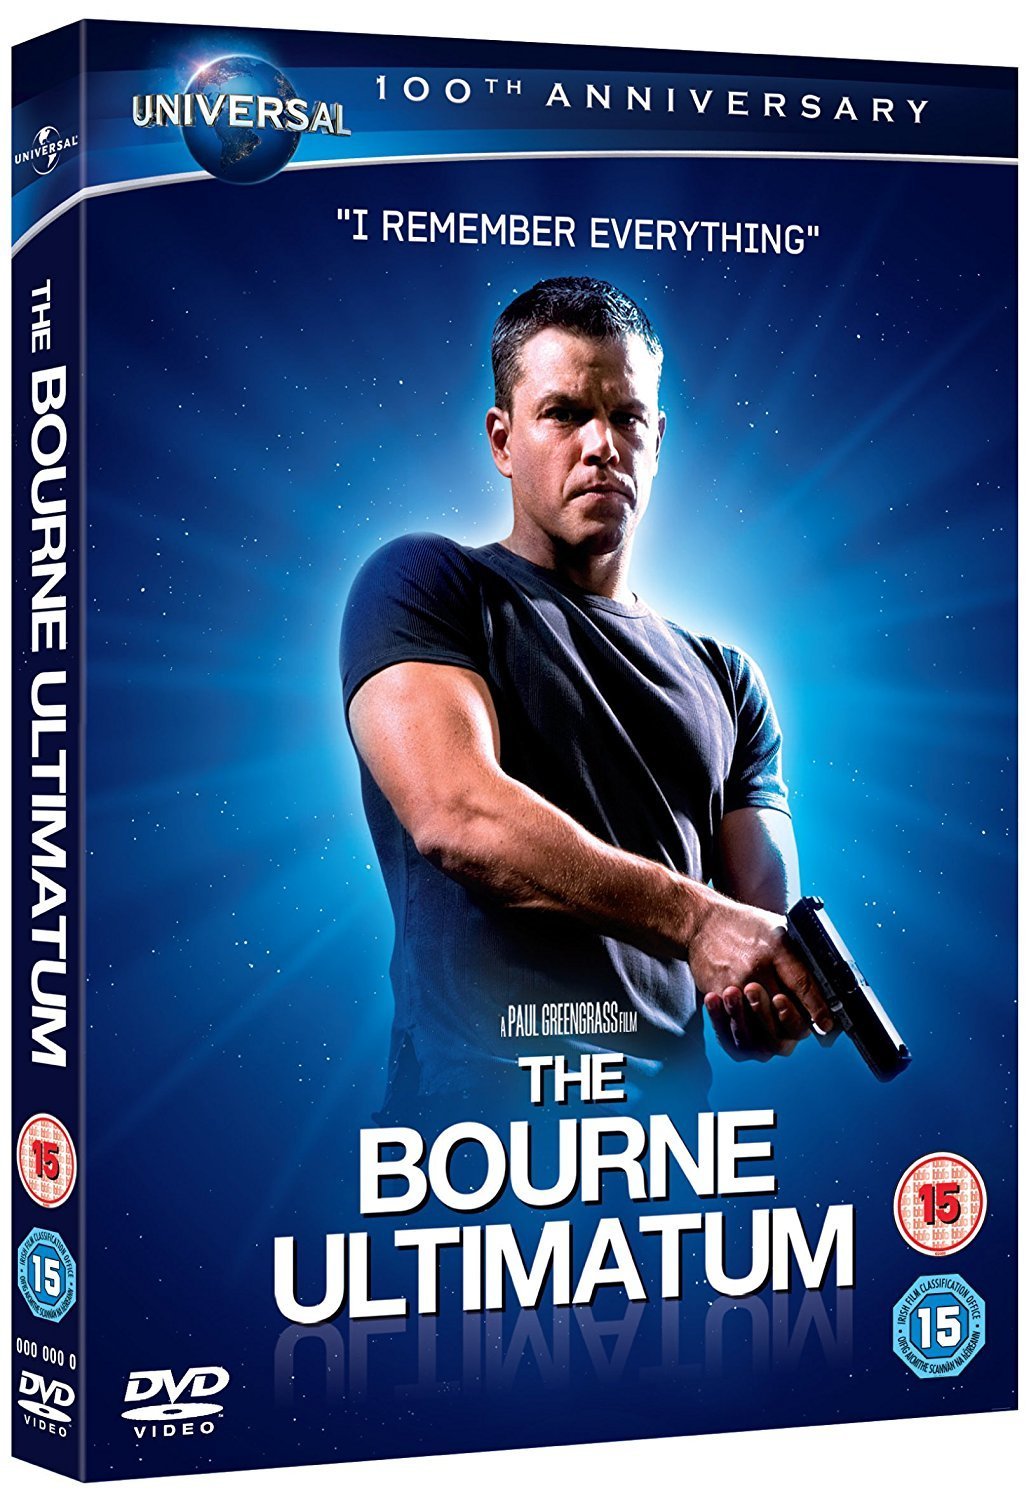 The Bourne Ultimatum - Universal Pictures Centenary Edition (DVD)